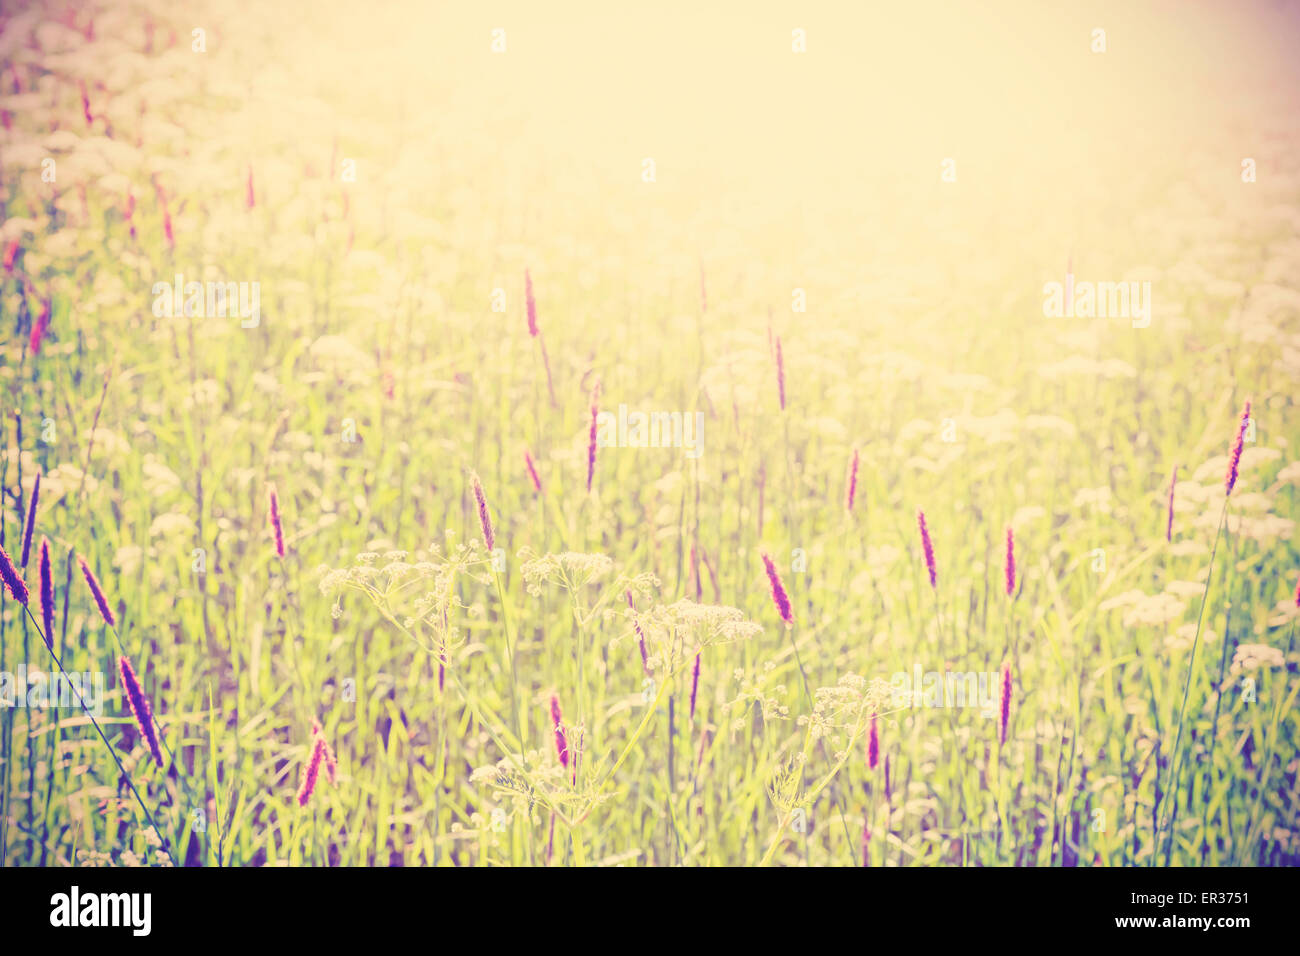 Abstract blurred nature background, vintage toned. Stock Photo